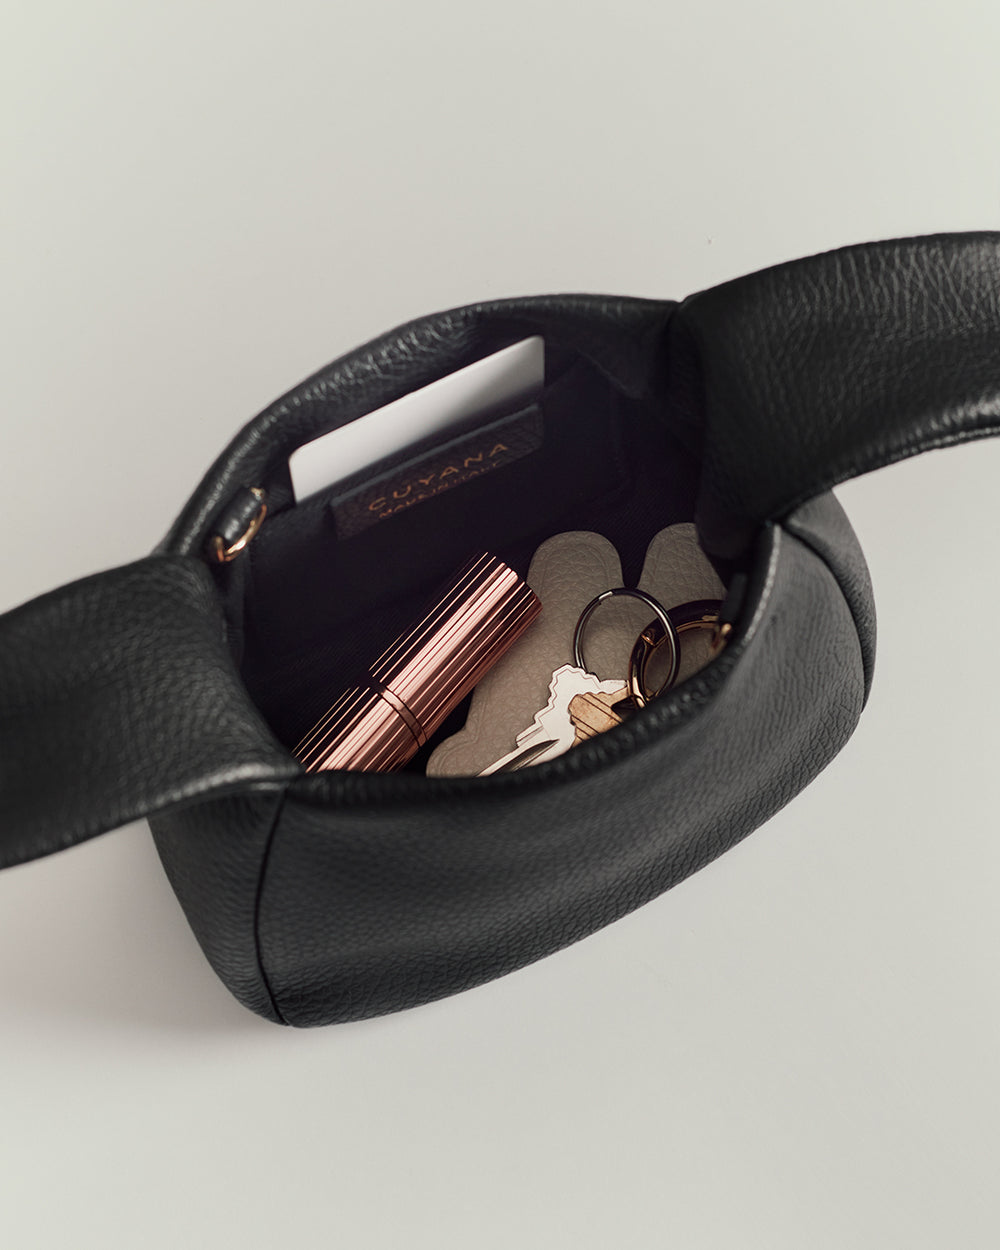 Open handbag with coins, keys, and a lipstick visible inside.